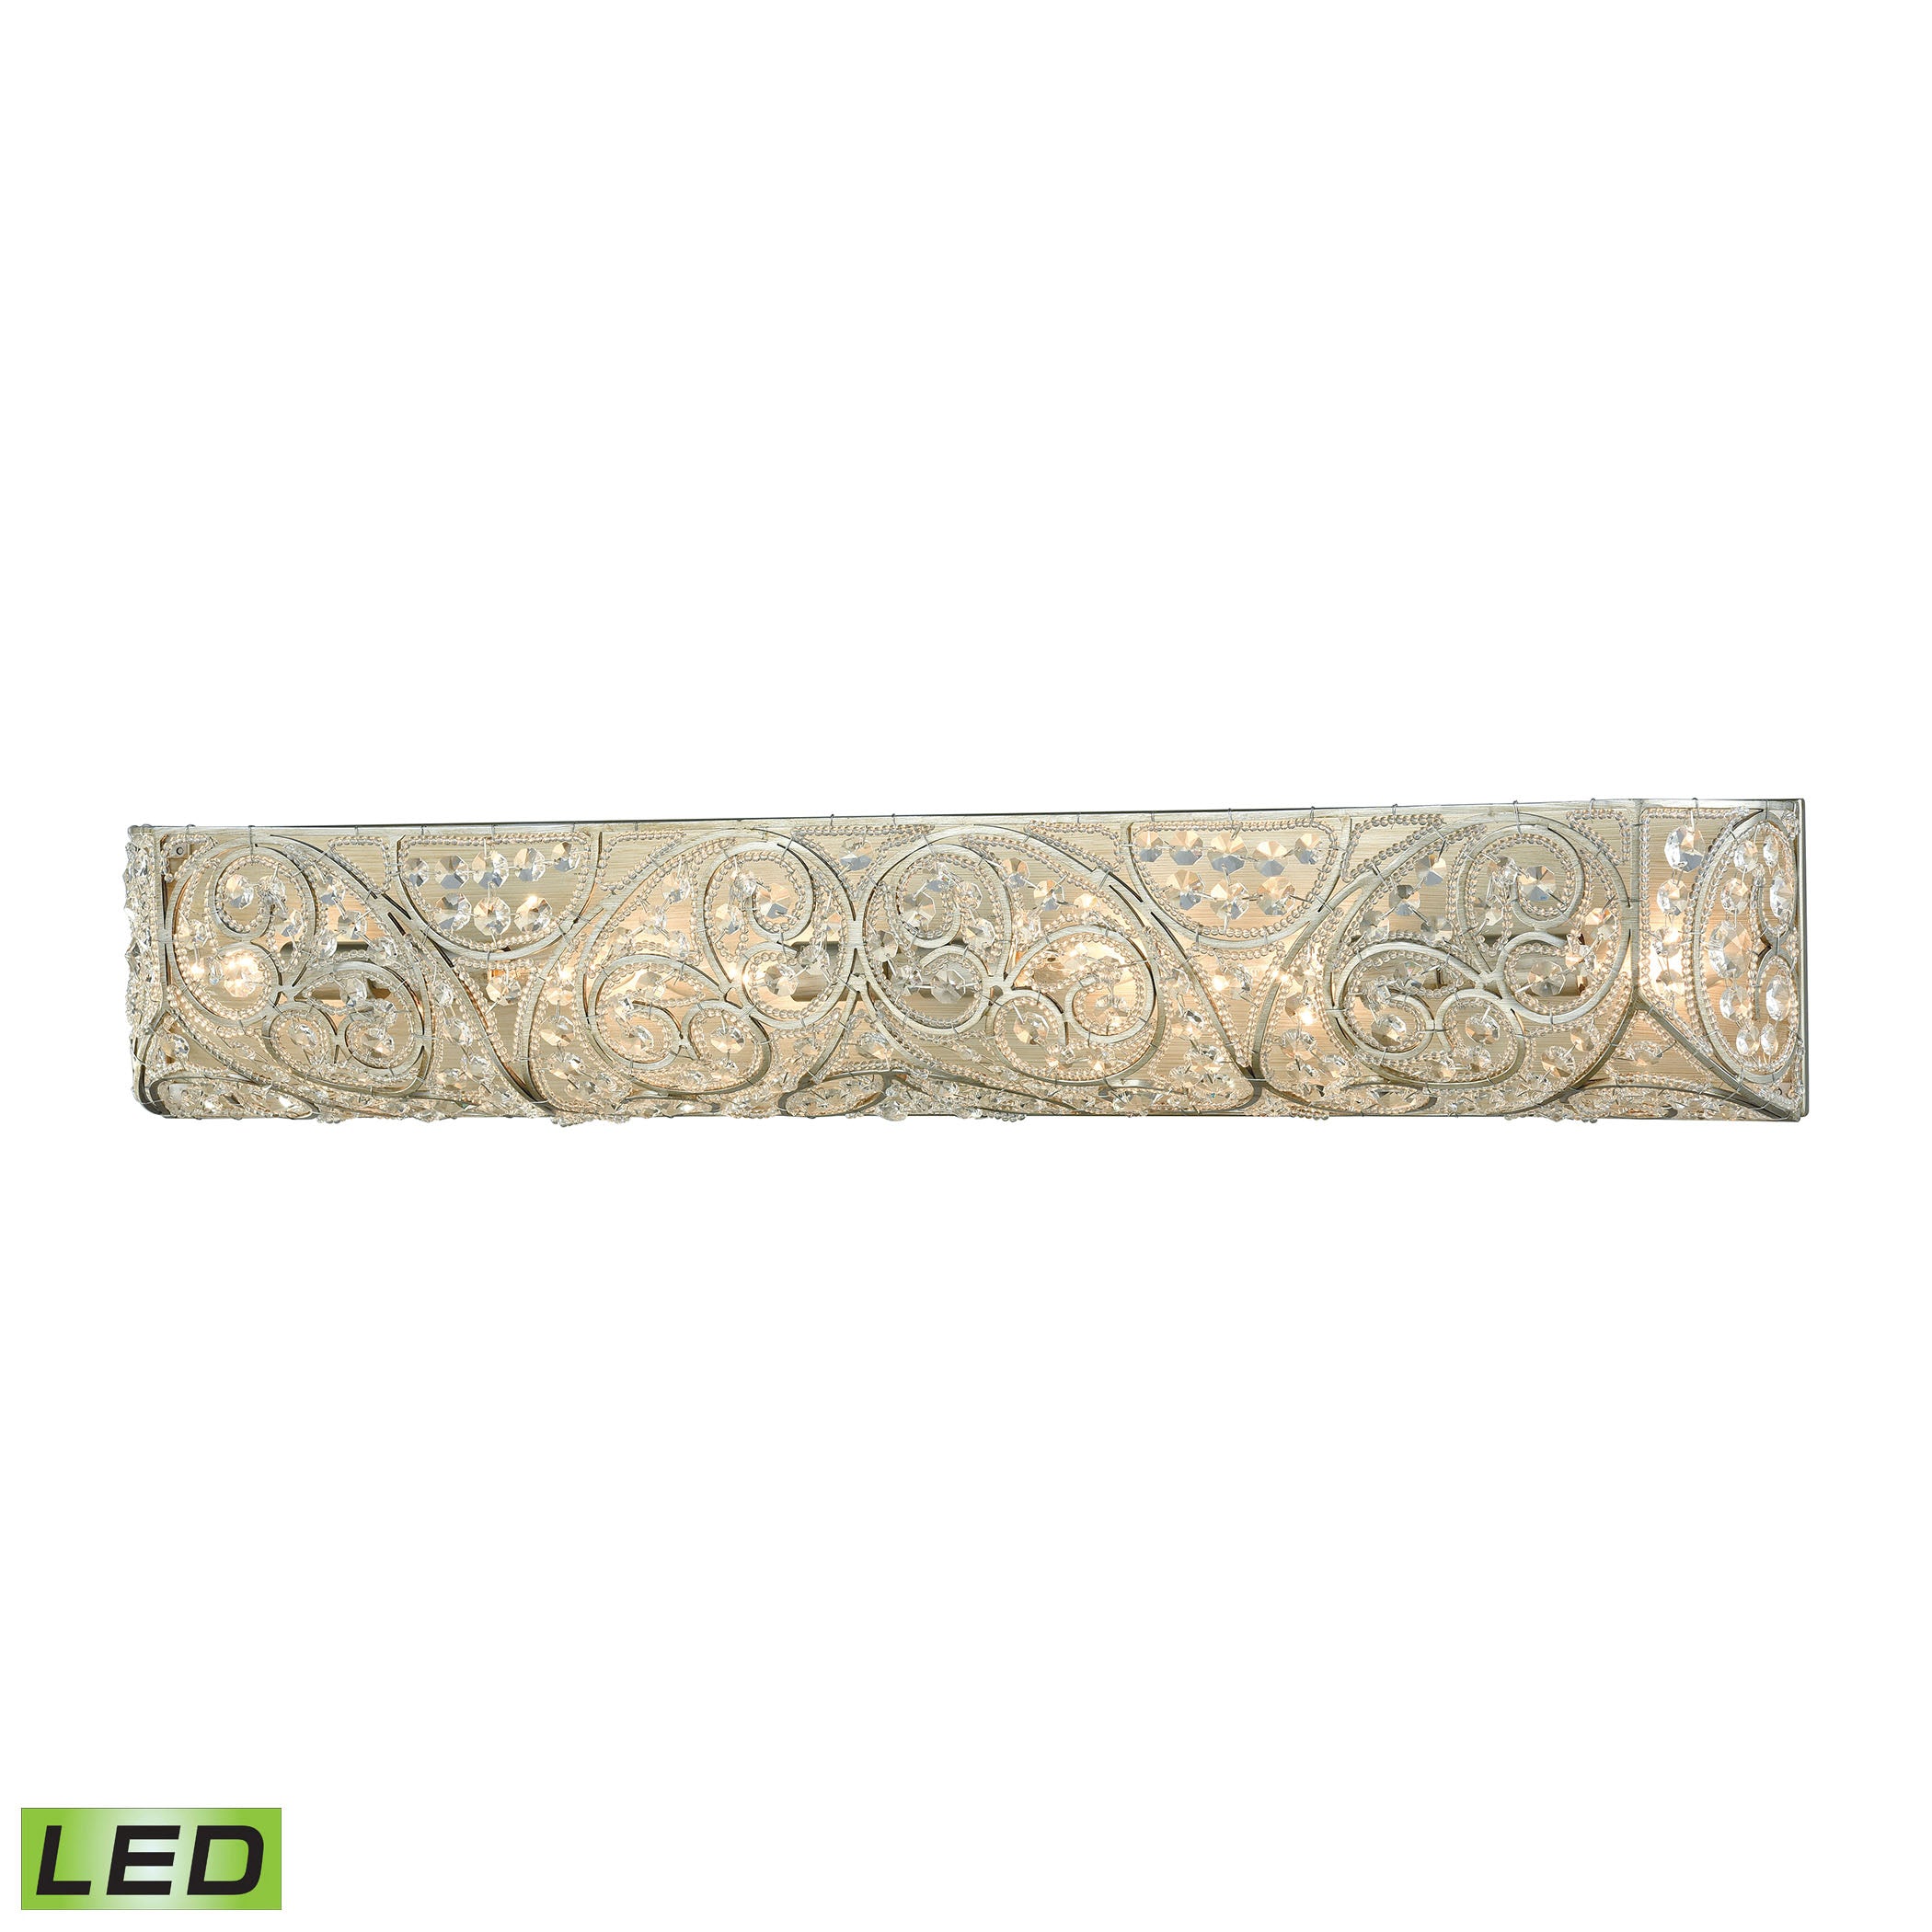 ELK Lighting 11699/6-LED Andalusia 6-Light Vanity Sconce in Aged Silver with Crystal and Beaded Glass - Includes LED Bulbs